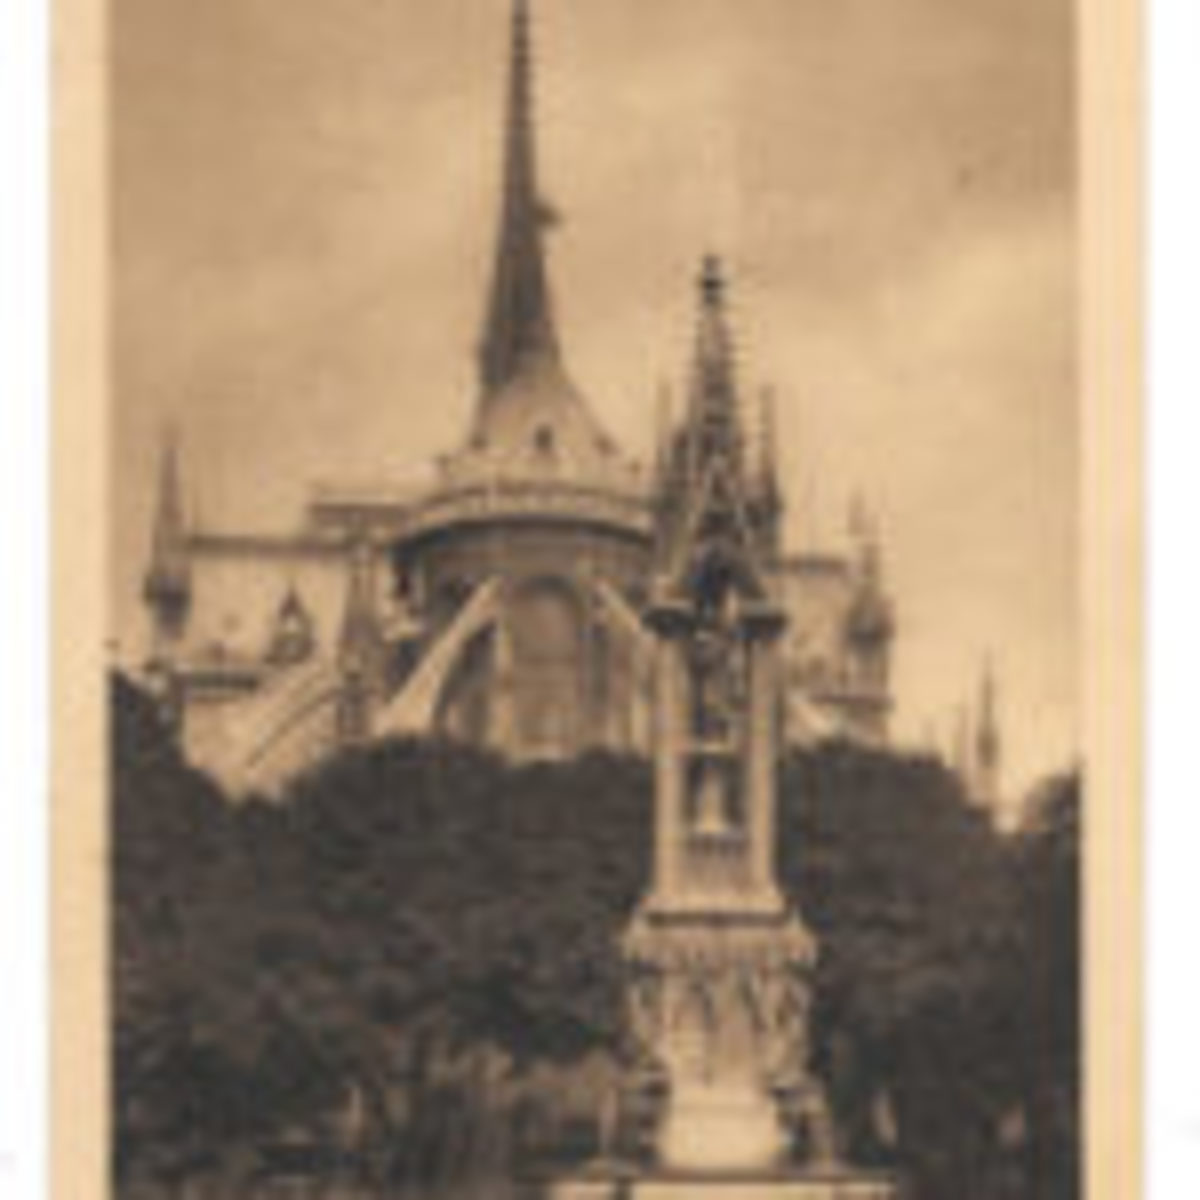 The flying buttresses, which transfer the weight of the walls to external supports, can be seen in this 1970s photo view from the east of Notre-Dame de Paris by Mona.